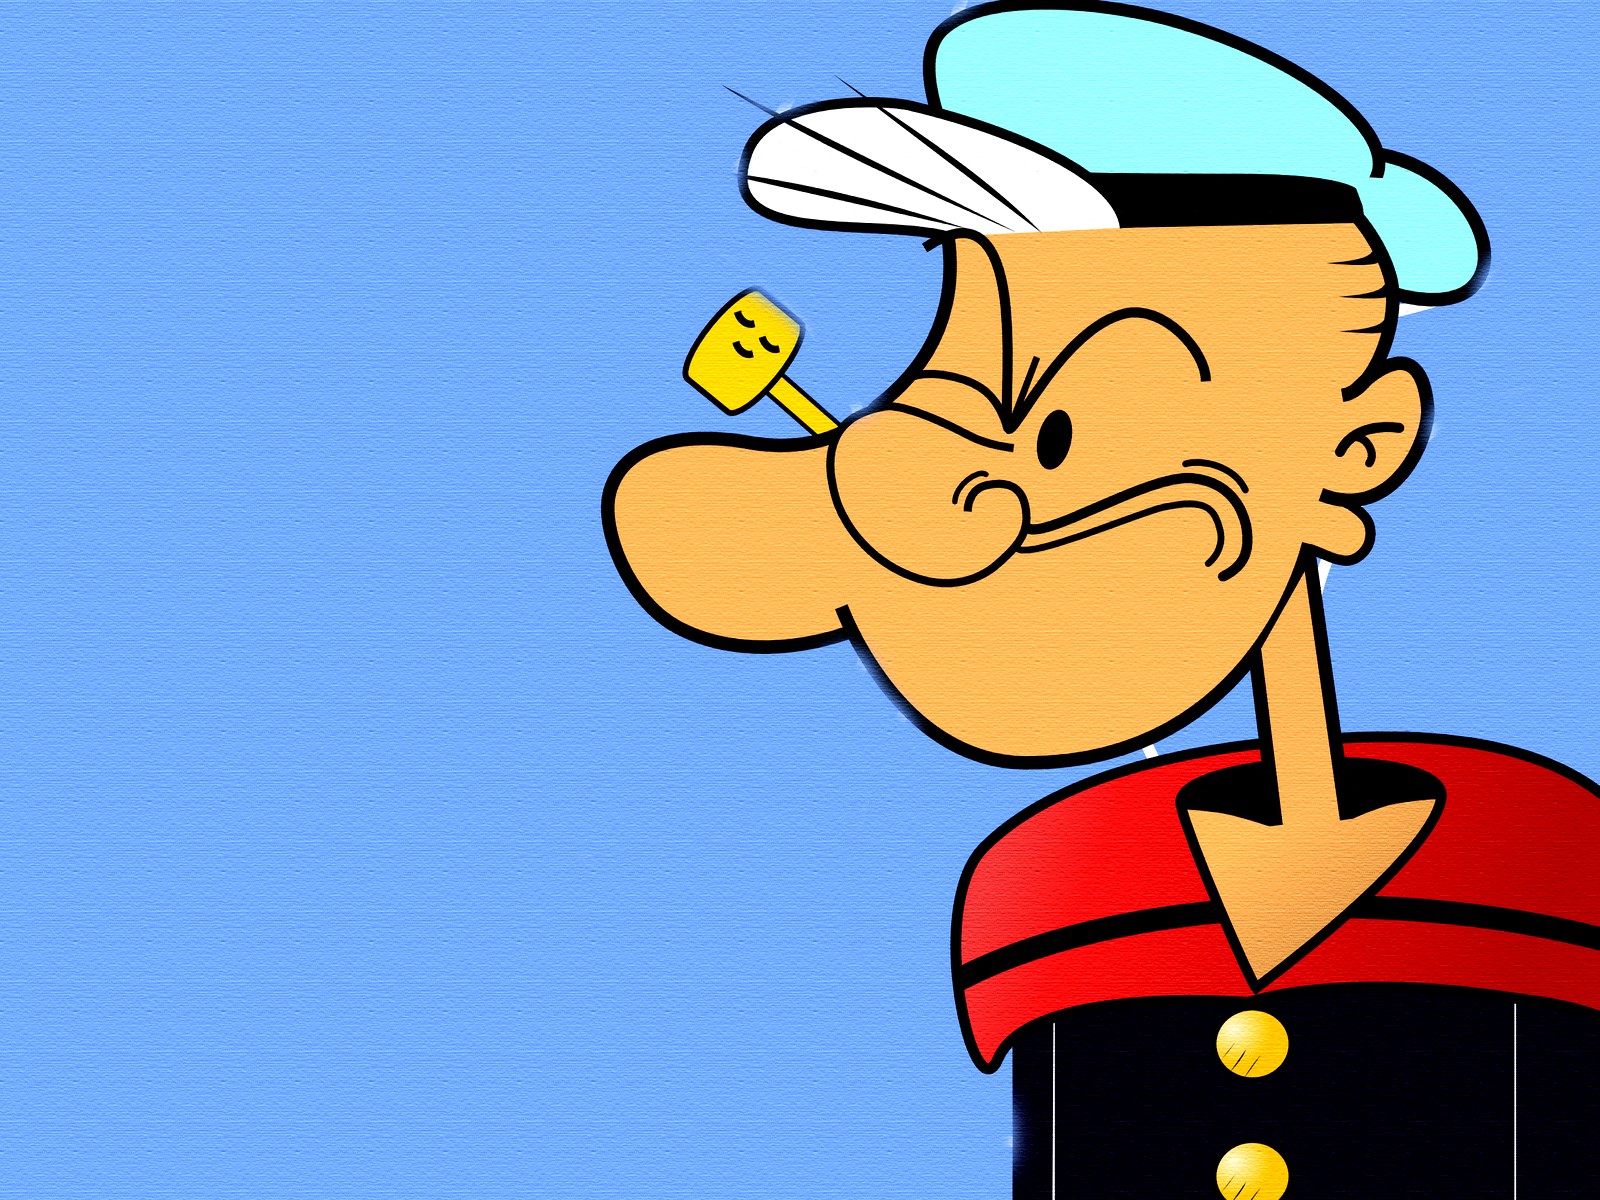 Popeye The Sailor Man | Hd Wallpapers - ClipArt Best - ClipArt Best